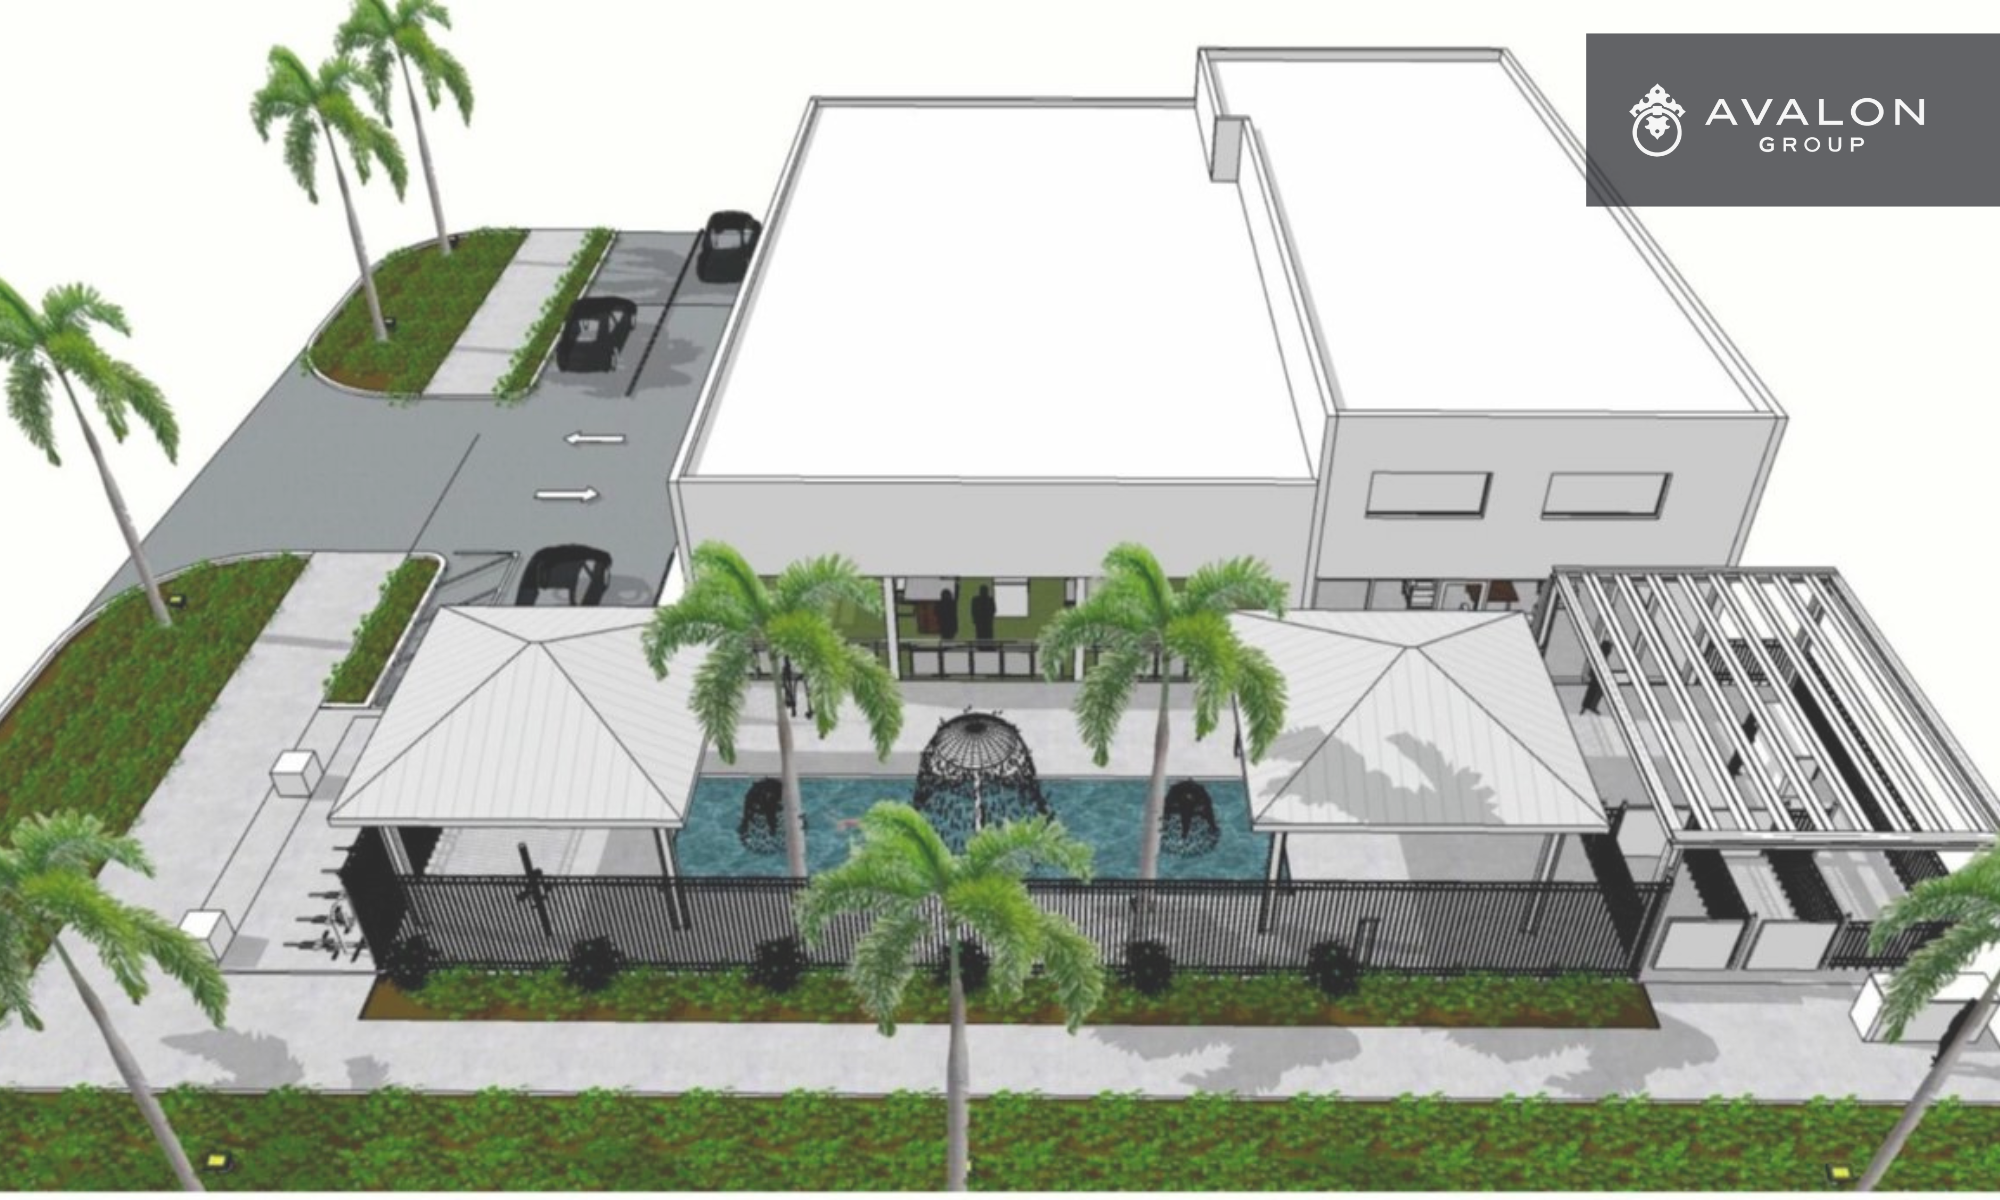 This is the rendering of the new Mutts and Martinis on Central. The picture shows the pool area and building.